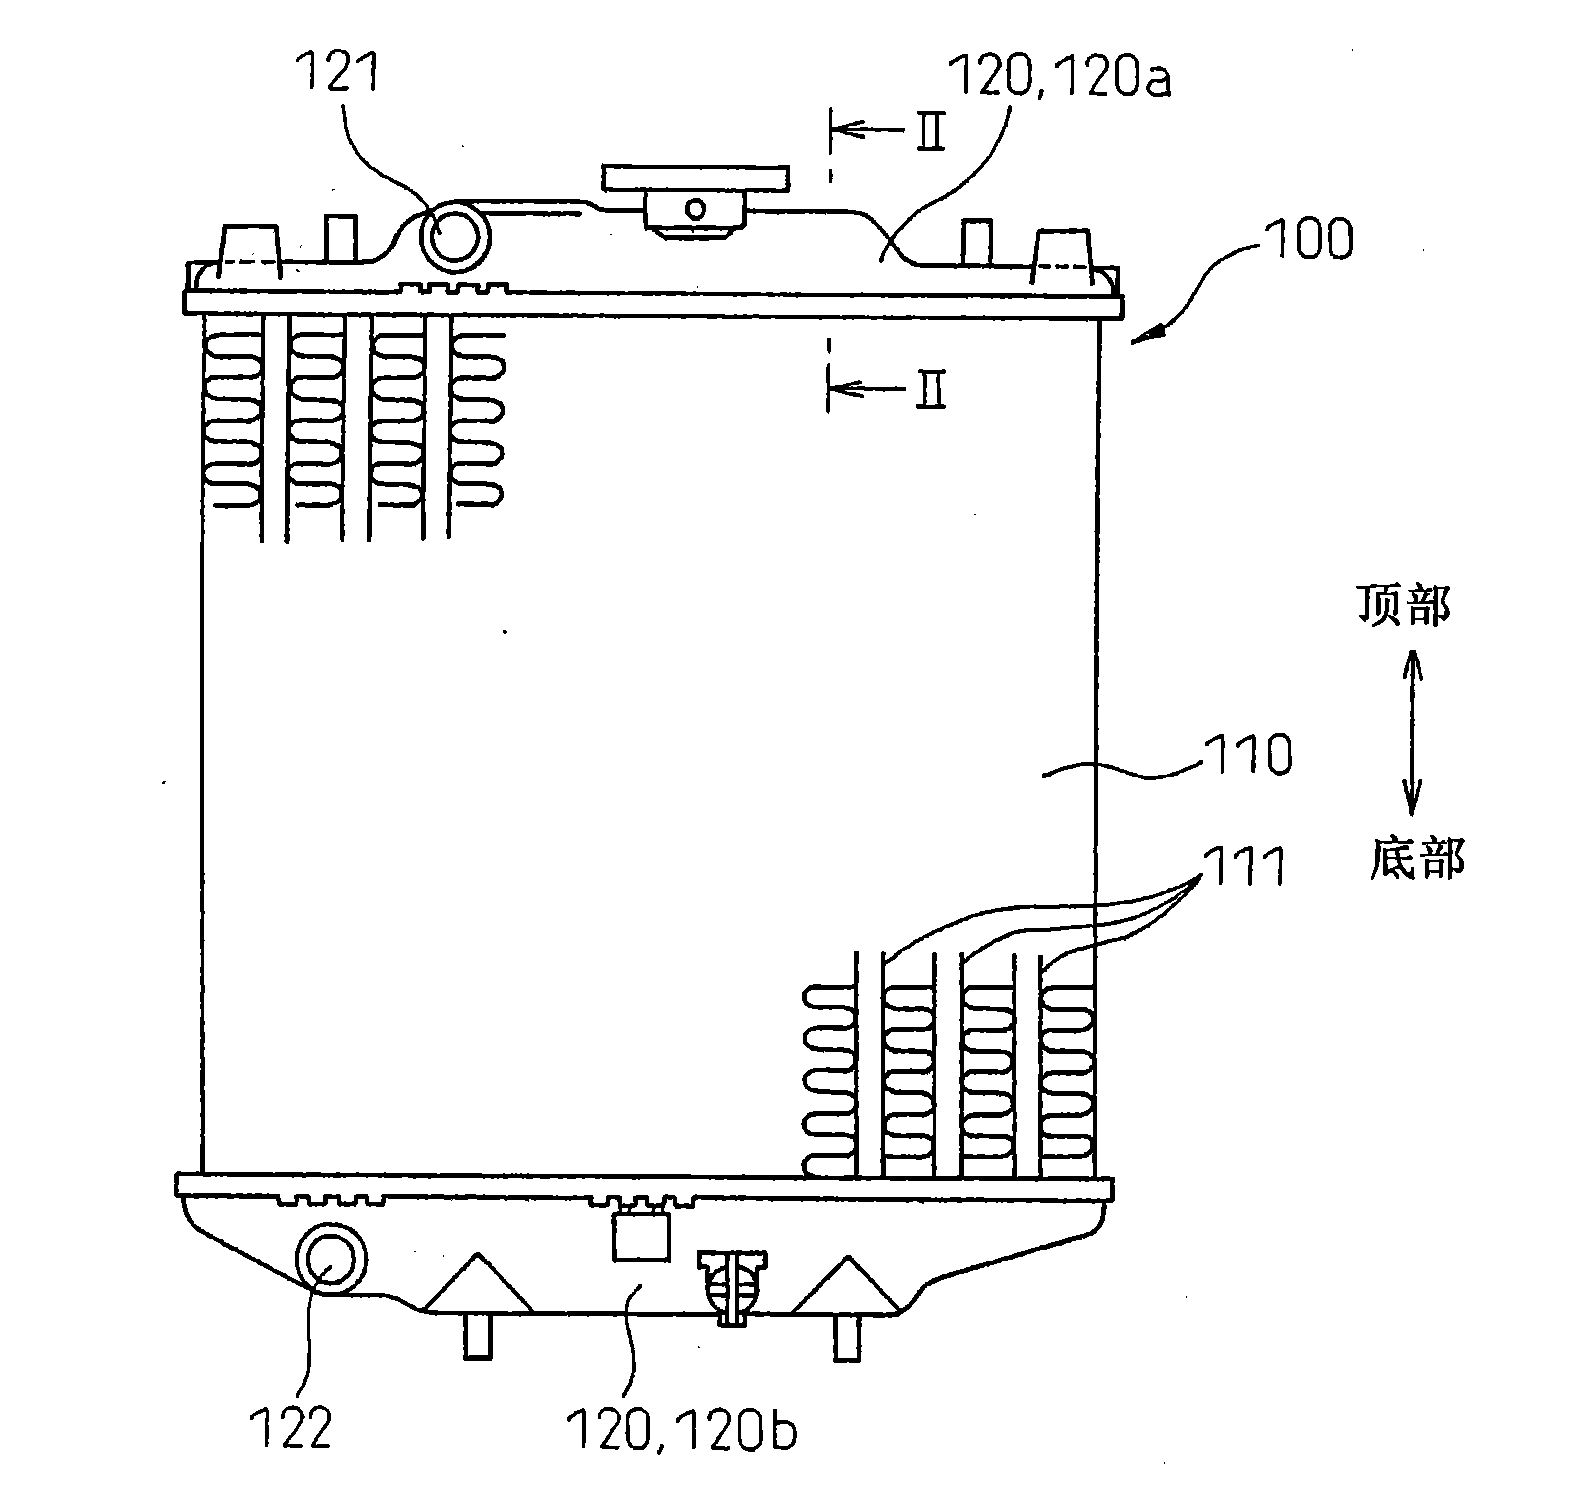 Constituent part of cooling system for motor vehicle